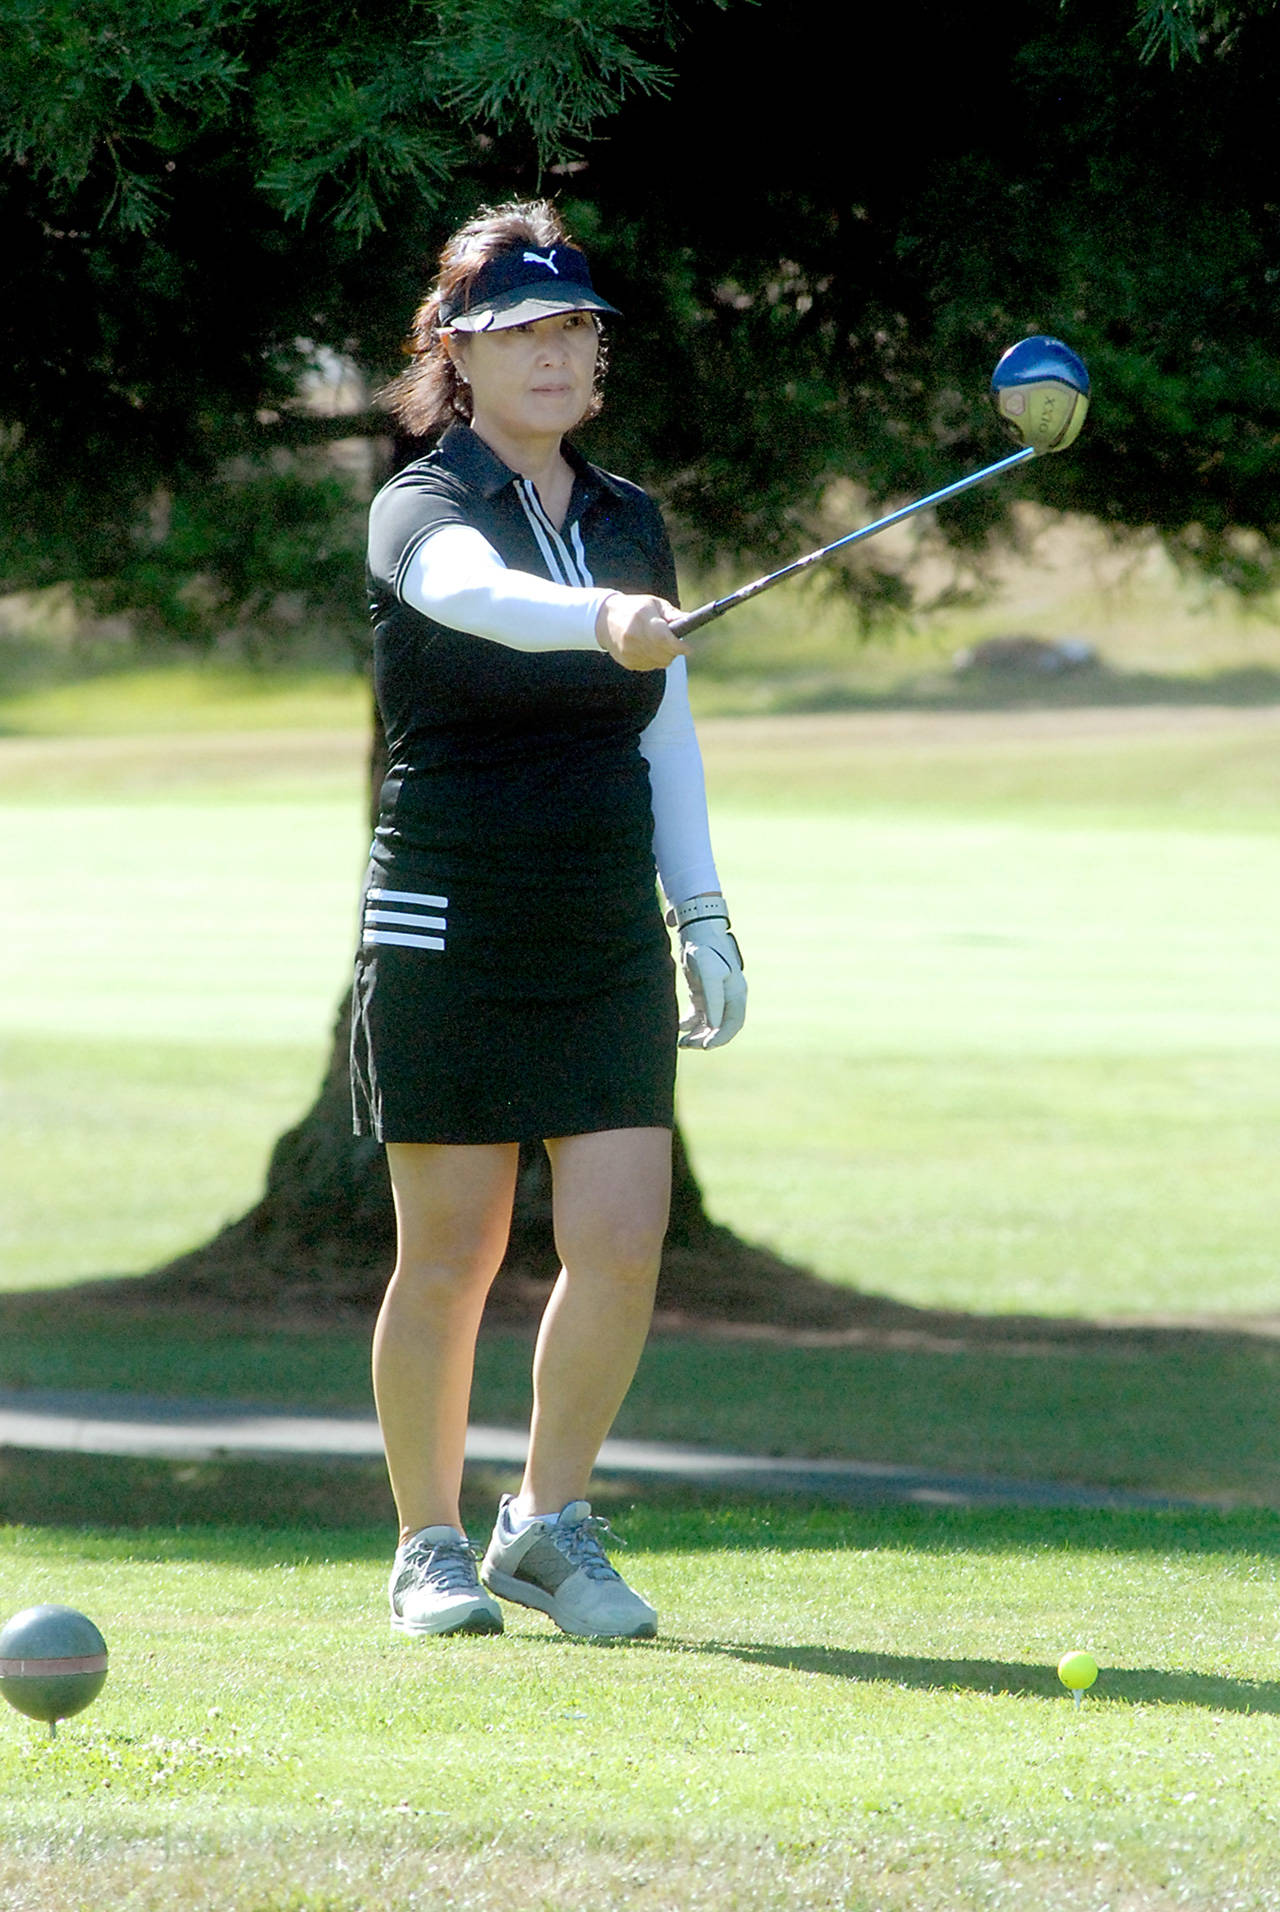 Yoon Park of Sequim takes aim on the first hole at Peninsula Golf Course at the start of the 2021 Clallam County Amateur tournament on June 10. Photo by Keith Thorpe/Olympic Peninsula News Group